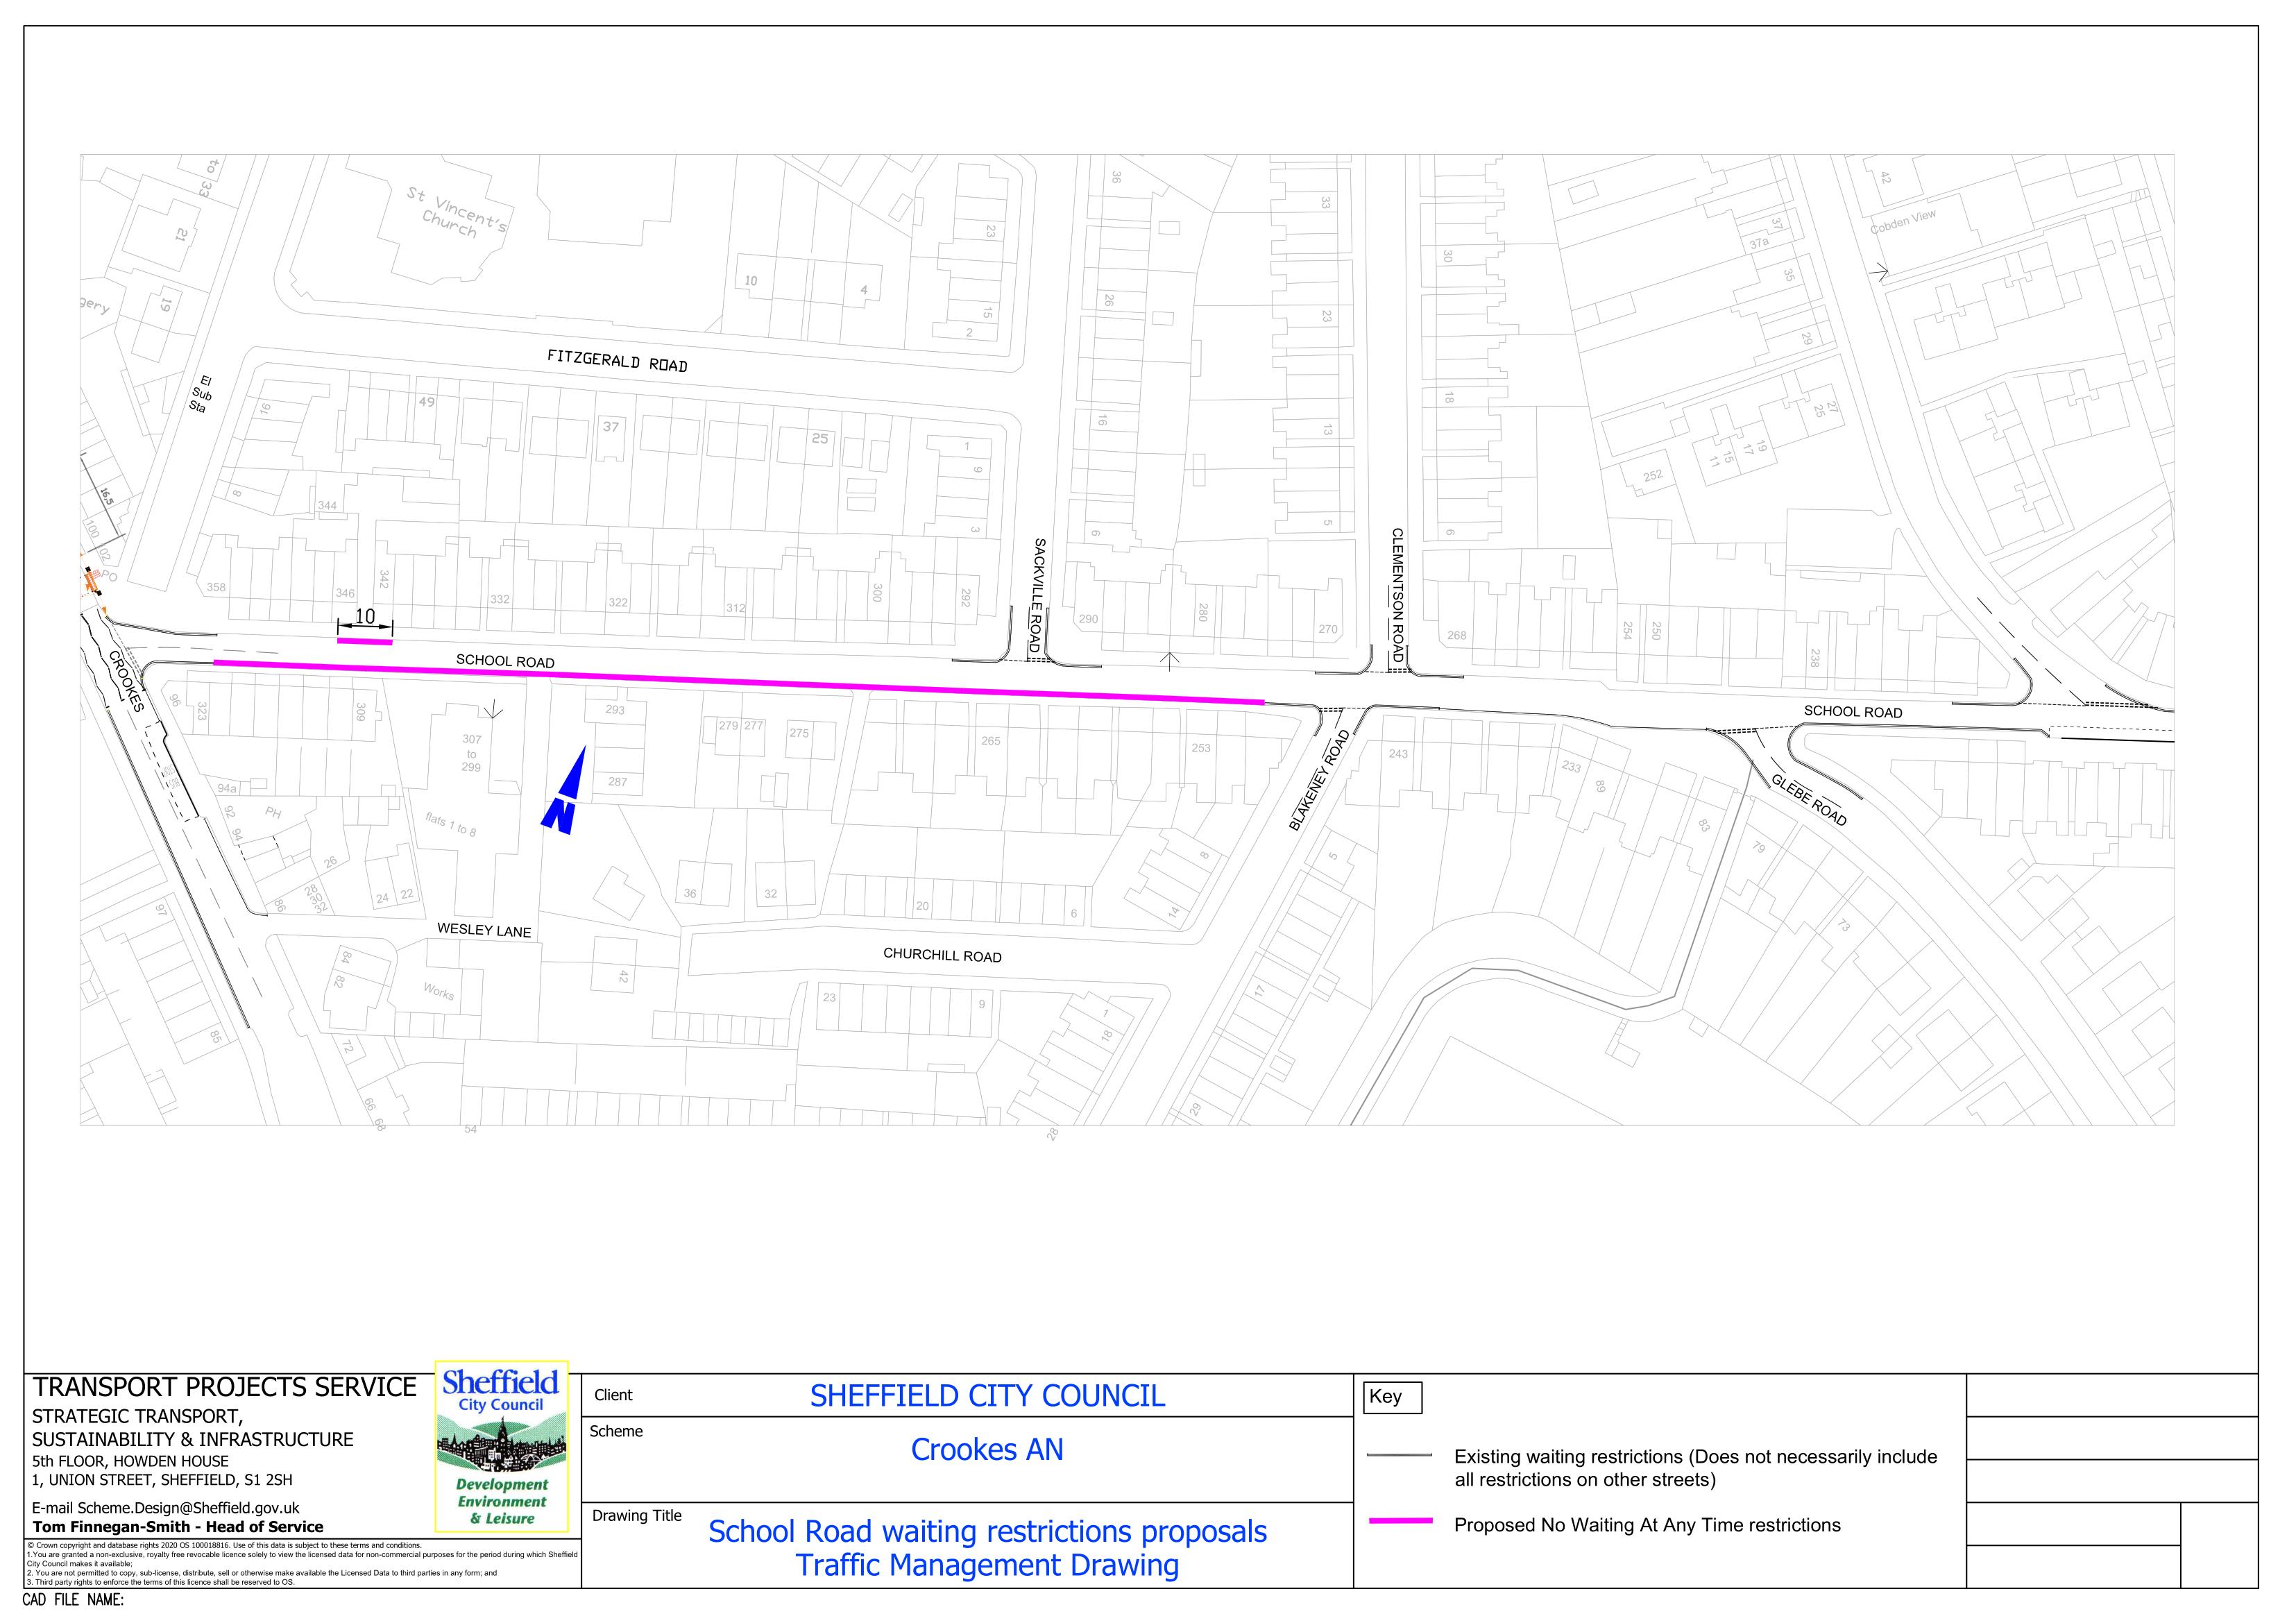 Diagram of proposed double yellow lines on School Road